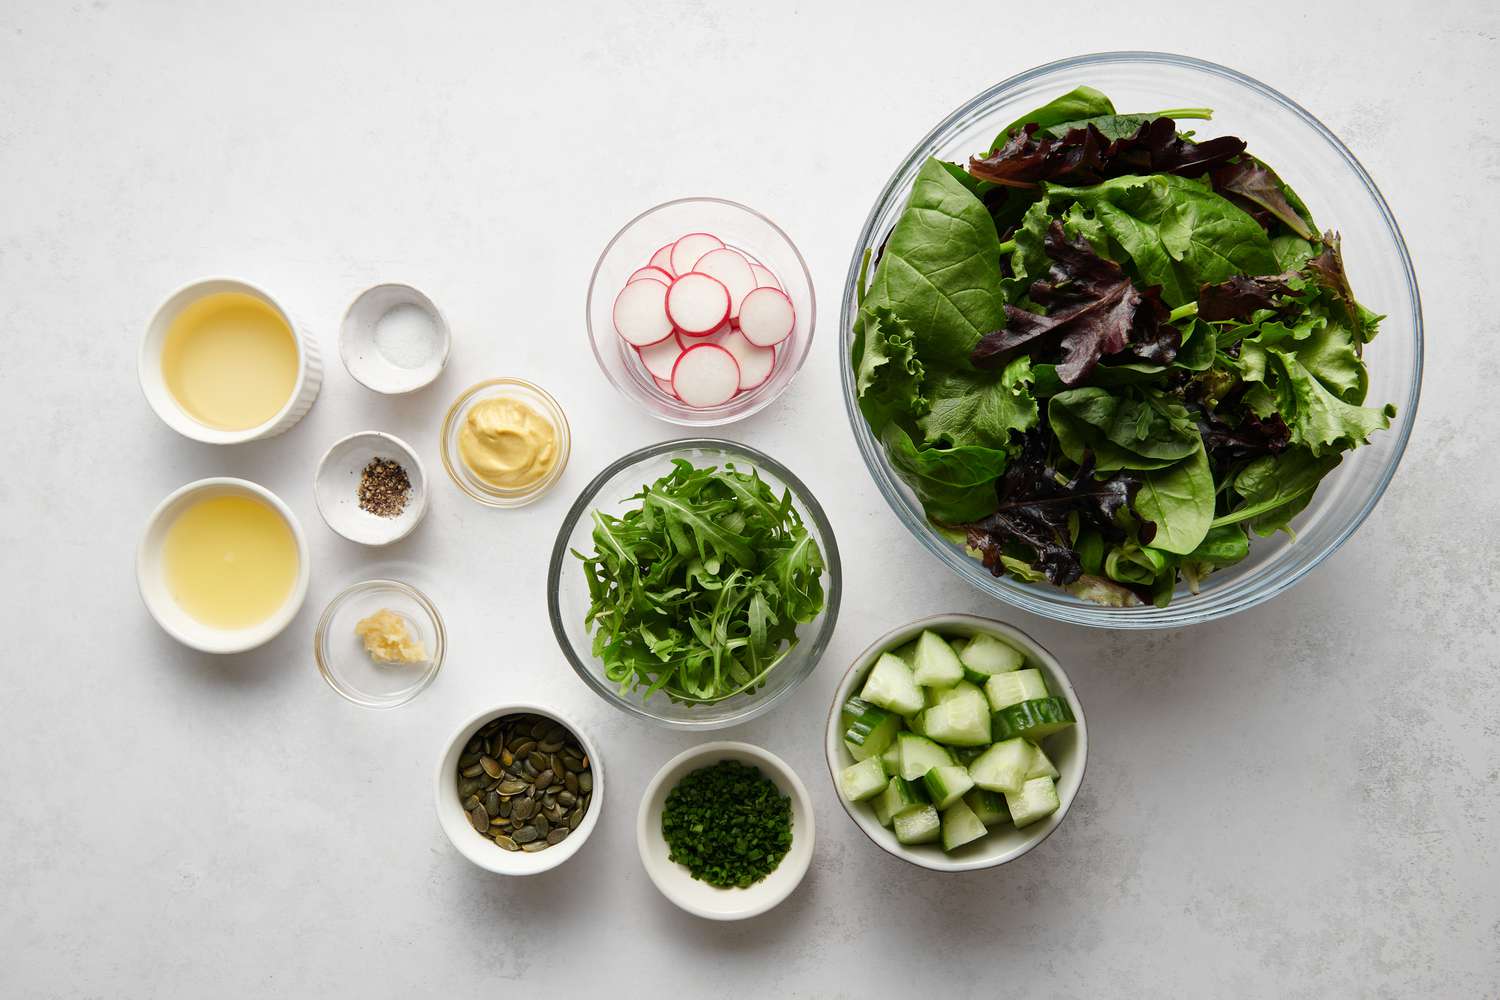 Ingredients to make a simple green salad